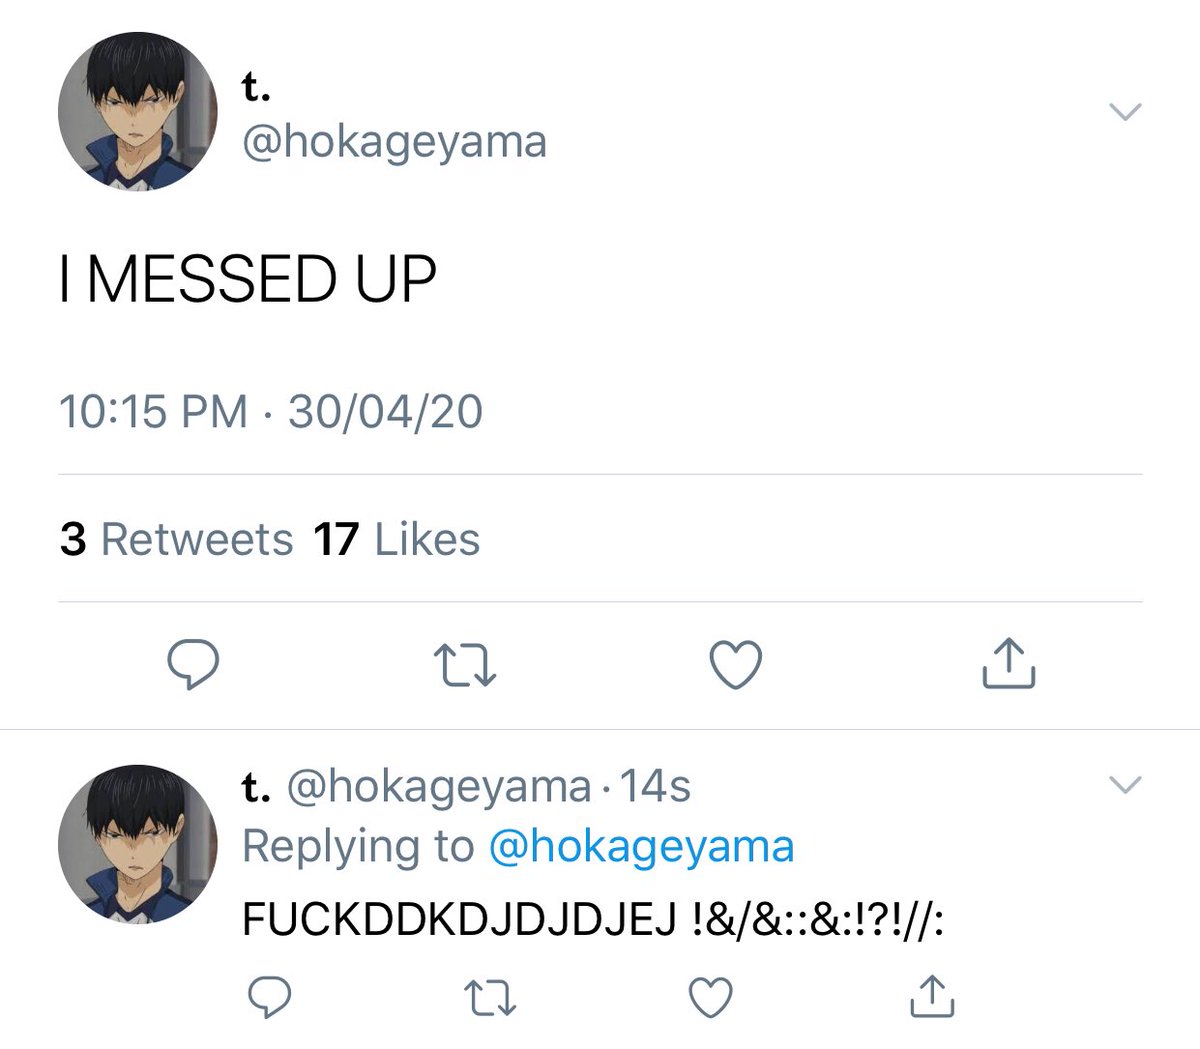 ` a socmed au  —kagehinain which tobio kageyama creates a fake “___ loves you” account just so he could anonymously send love to the clueless shouyou hinata.